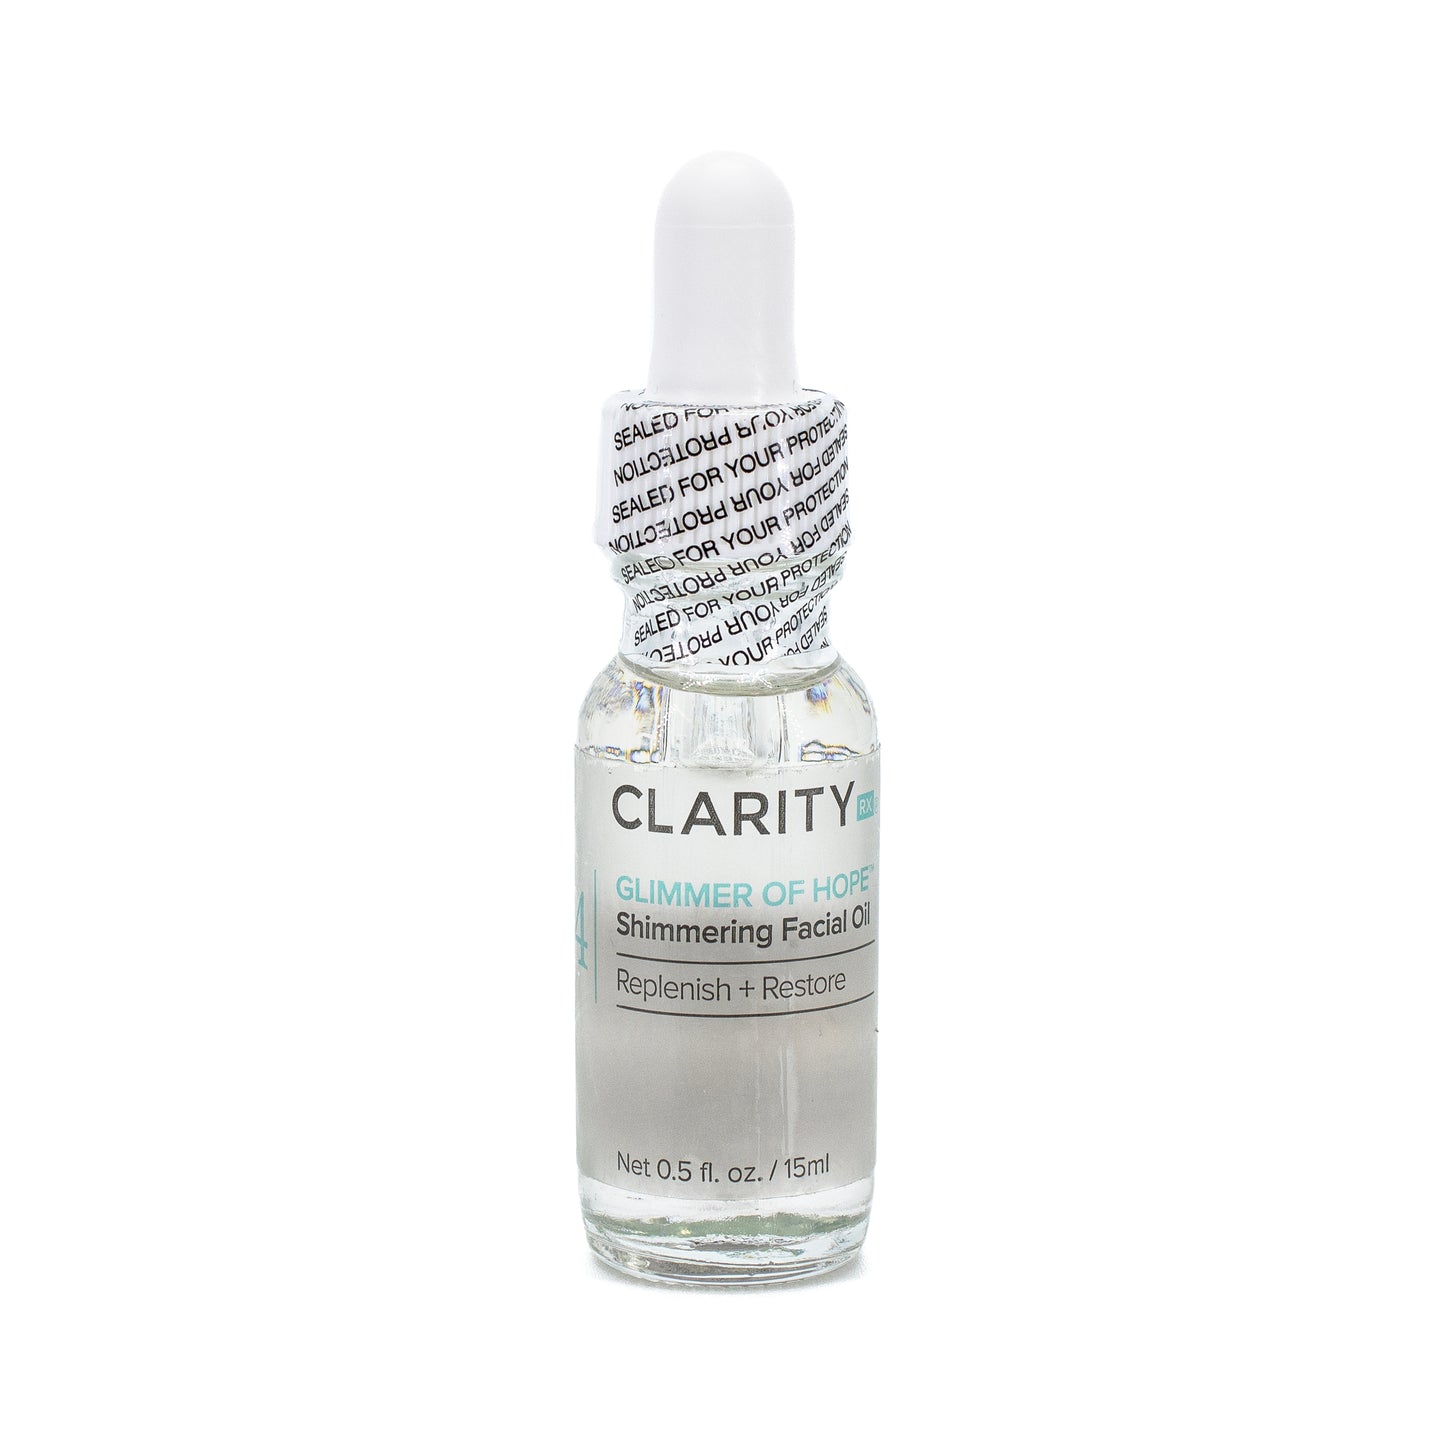 CLARITY RX Glimmer Of Hope Shimmering Facial Oil 0.5oz - Missing Box